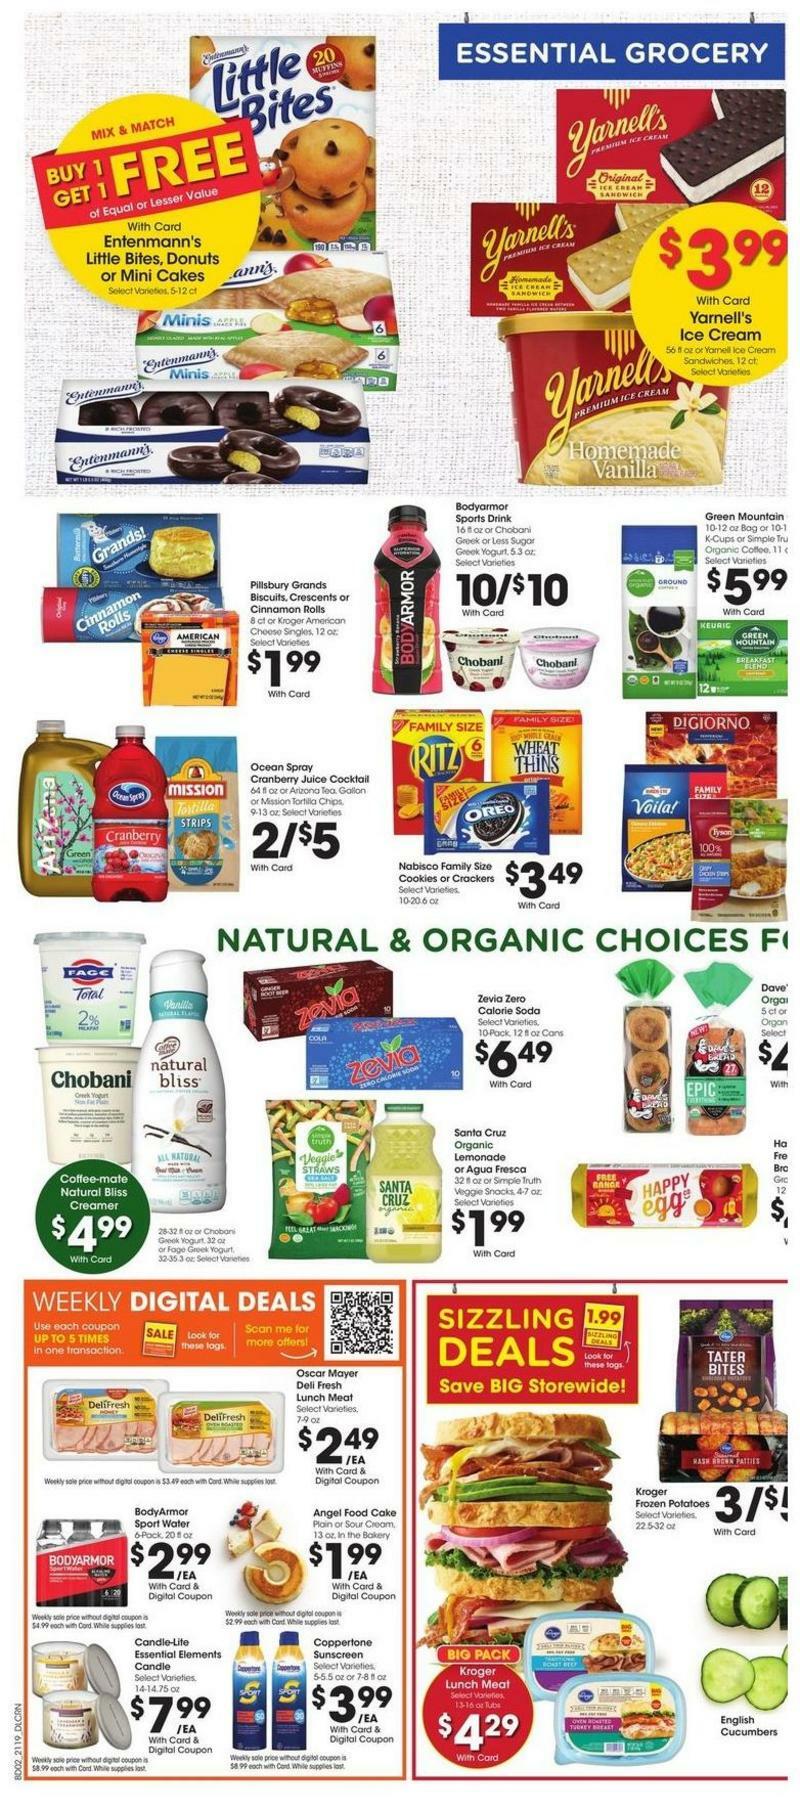 Kroger Weekly Ad from June 9